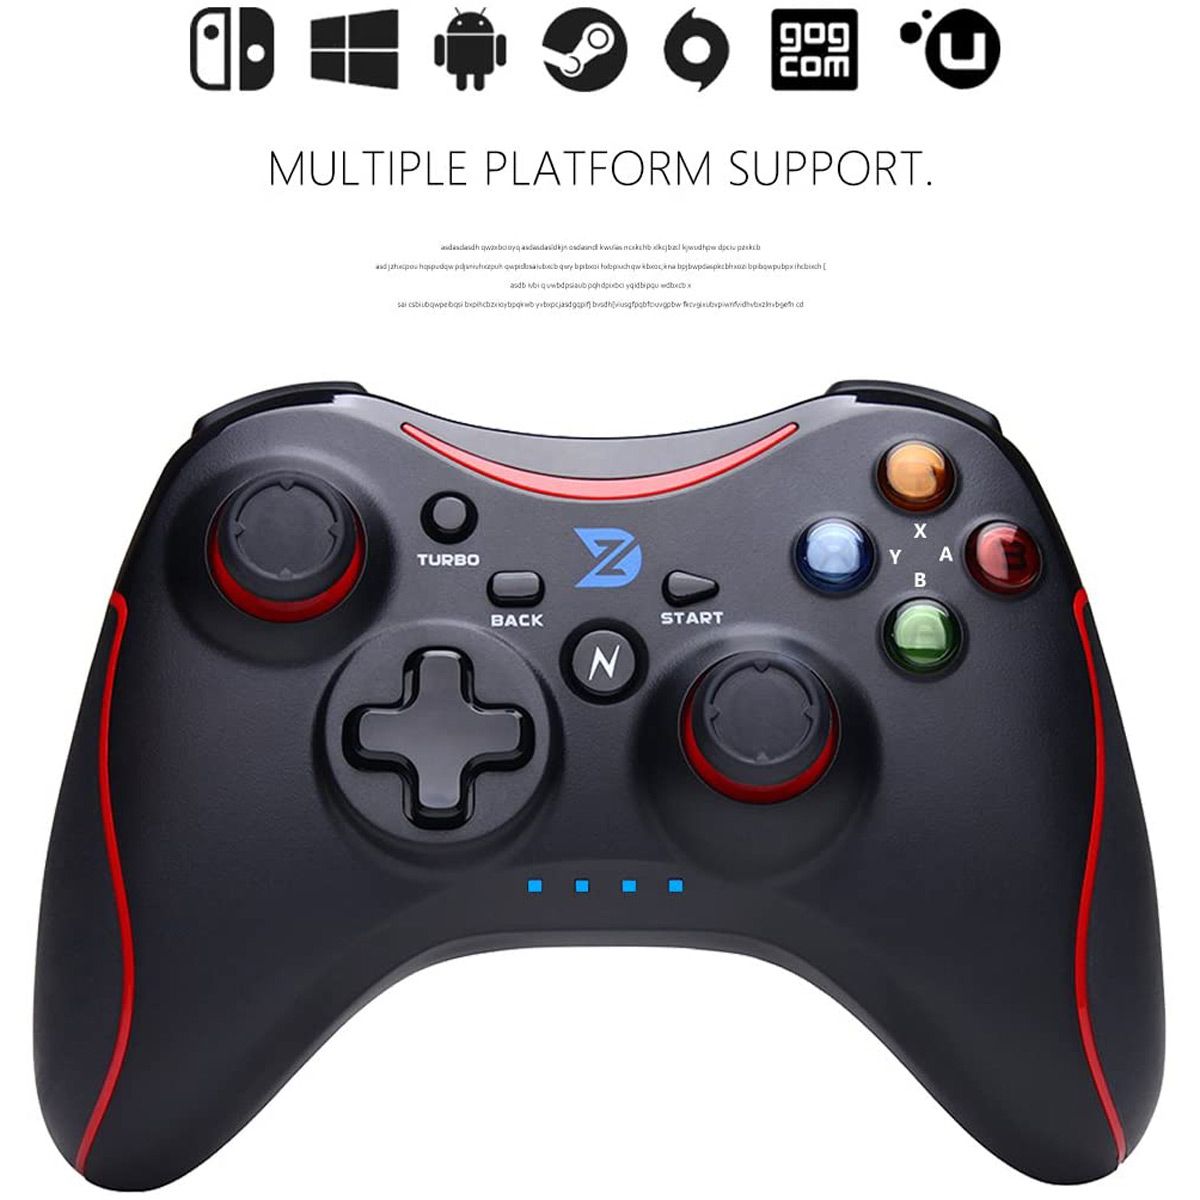 ZD-N208-24G-Wireless-Gaming-Controller-Gamepad-with-Vibration-Feedback-for-Steam-Switch-PC-Android-T-1698519